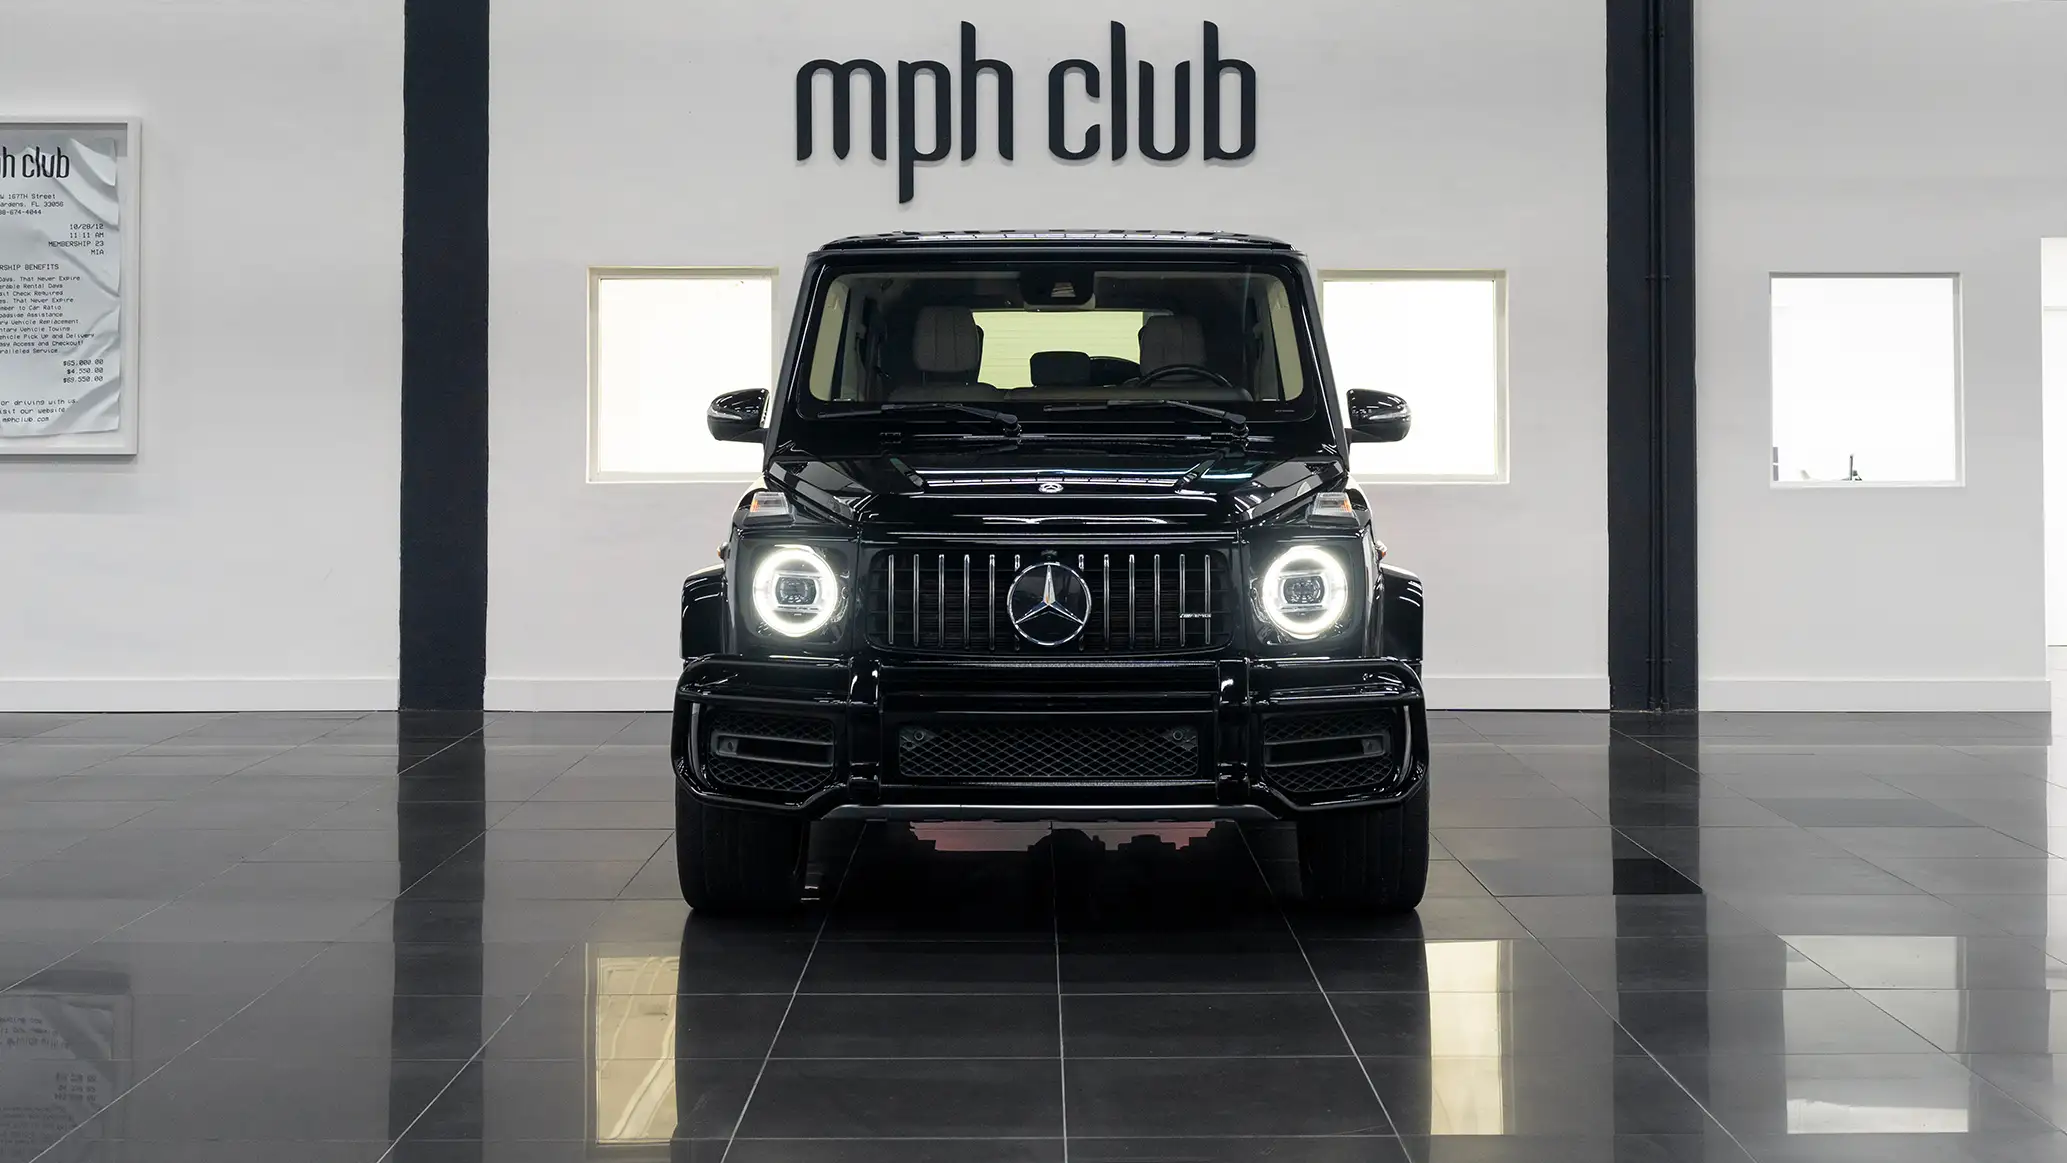 2020 black on white mercedes benz amg g63 for sale mph club